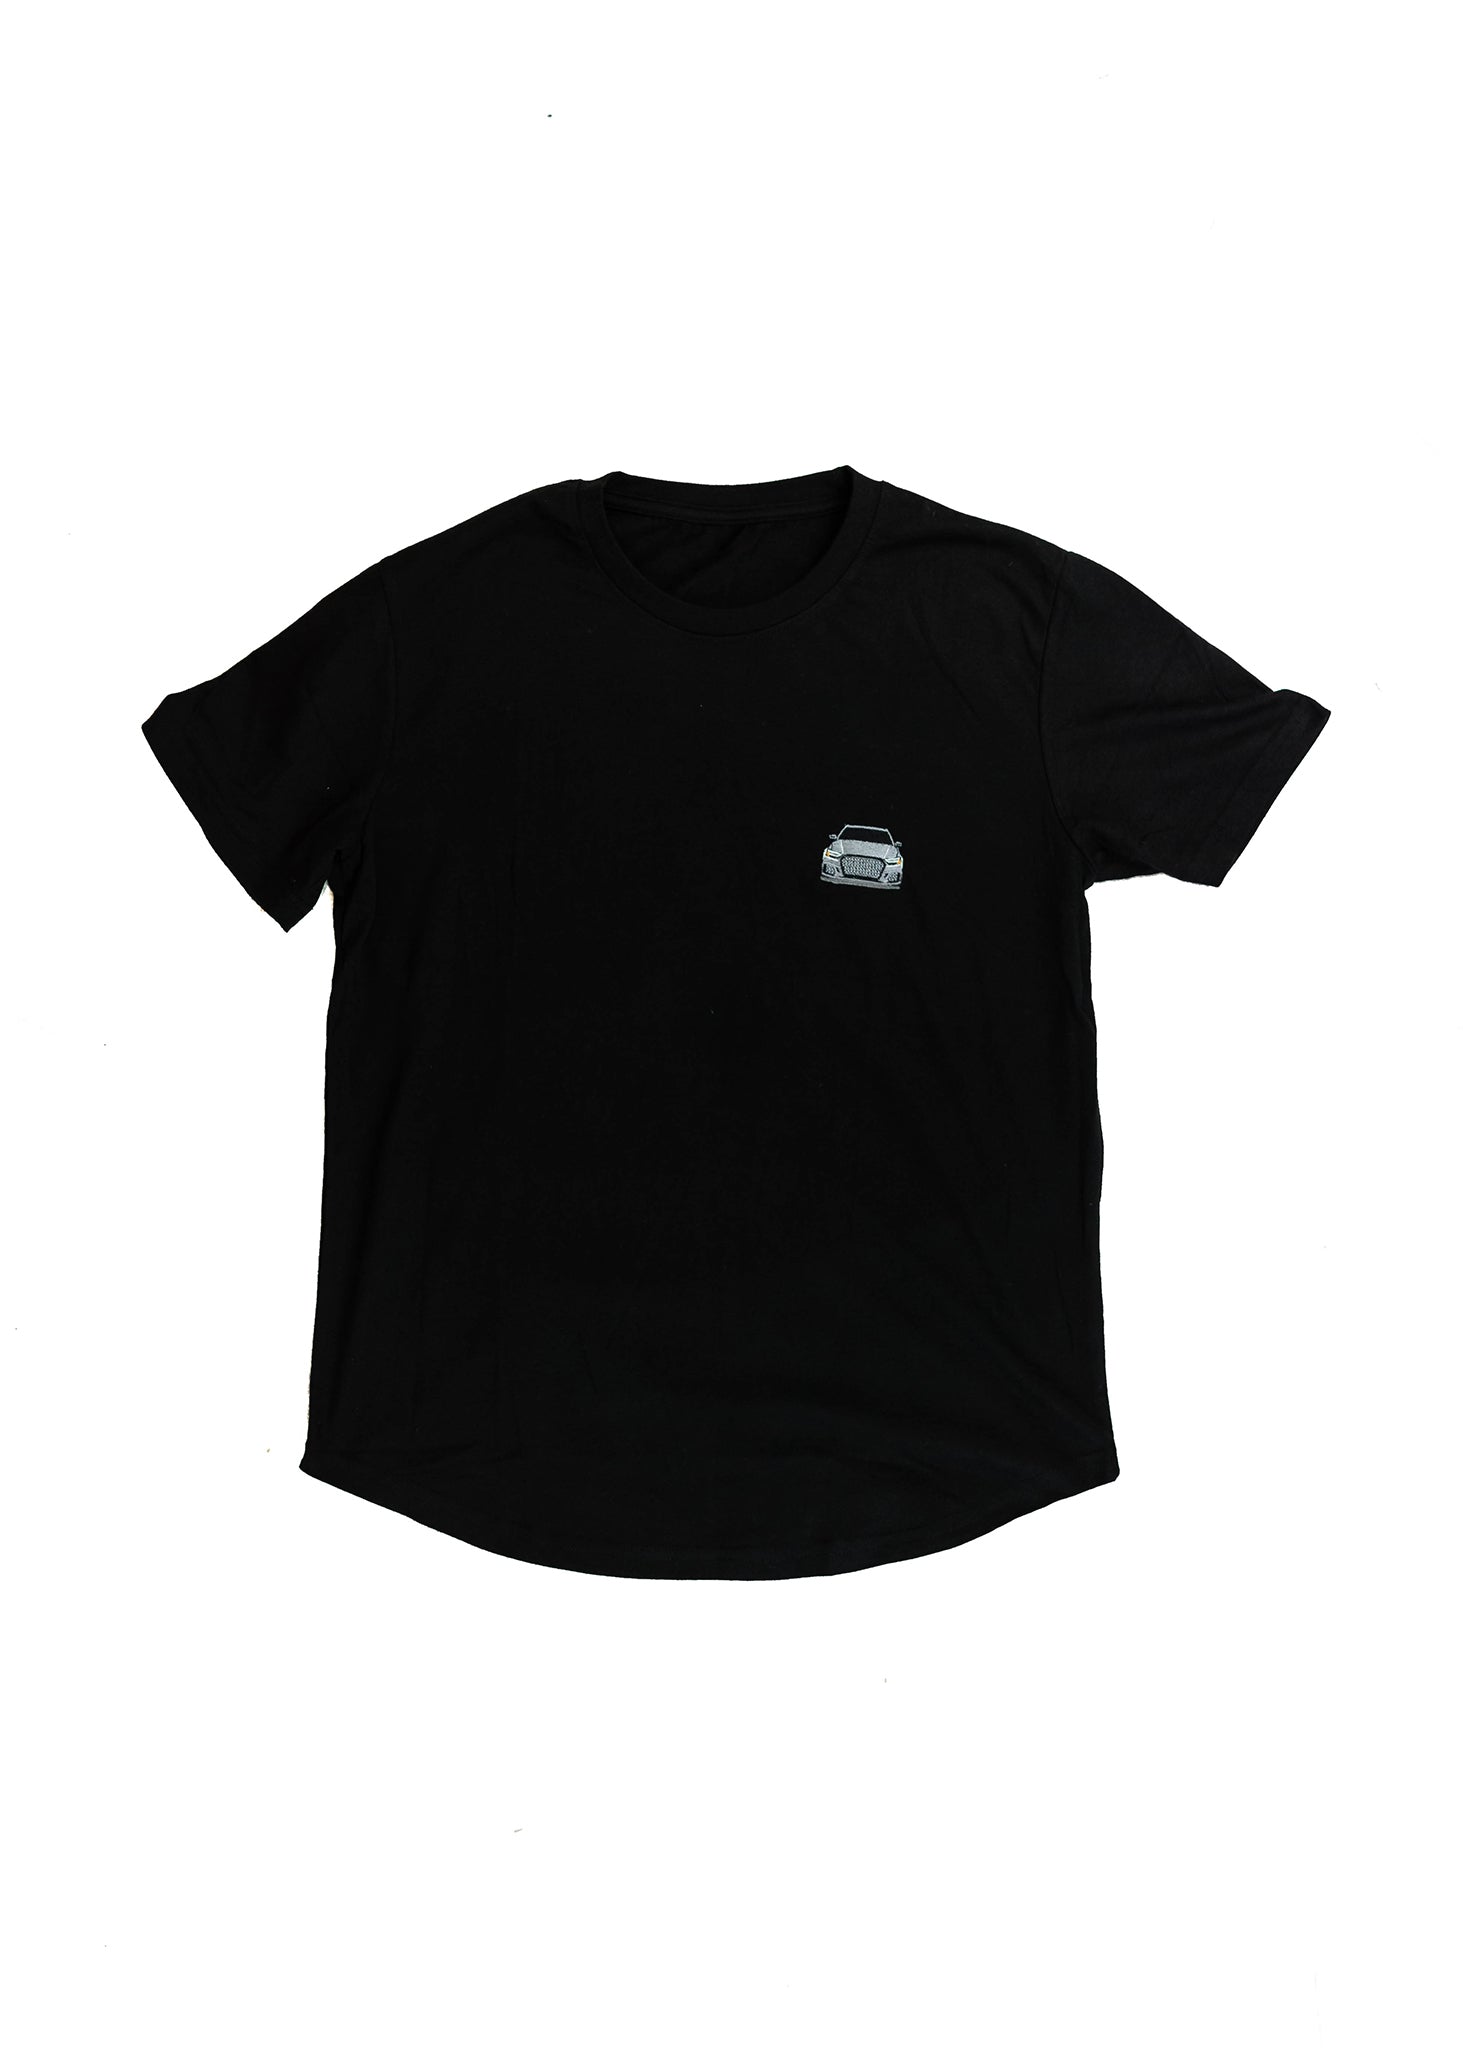 A black men's cotton t-shirt. Full size front view of the black shirt with a nardo grey embroidered 8V RS3. Fabric composition is a mix of polyester and cotton. The material is very soft, stretchy, and non-transparent. The style of this t-shirt is short sleeve, round bottom, crewneck, with embroidery on the left chest.